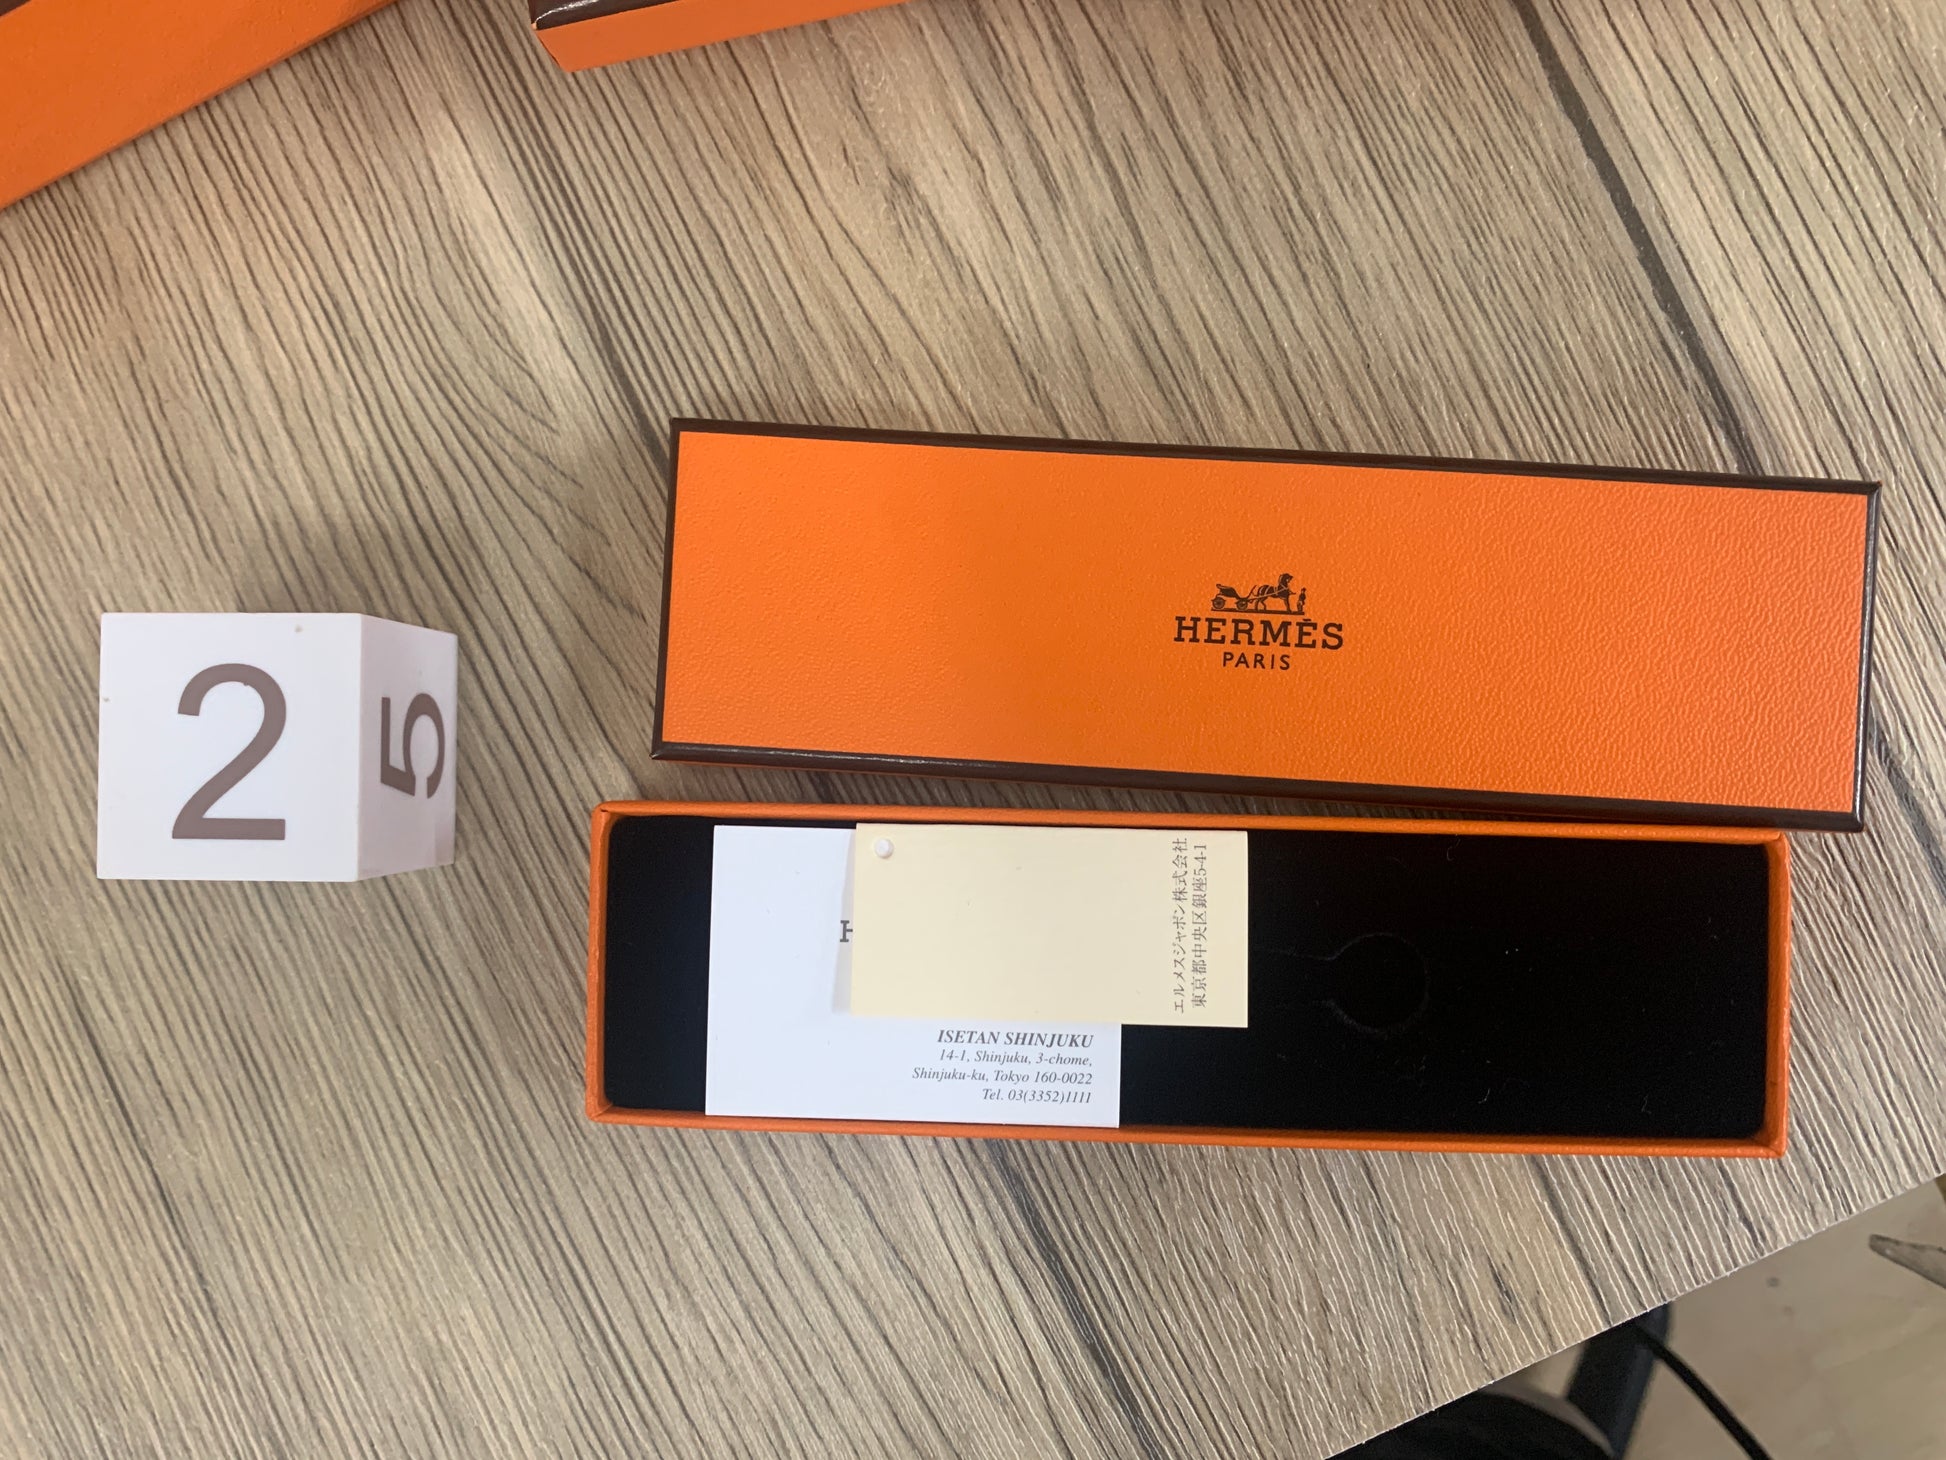 Authentic) Hermes Gift Box and Shopping Bag (Empty